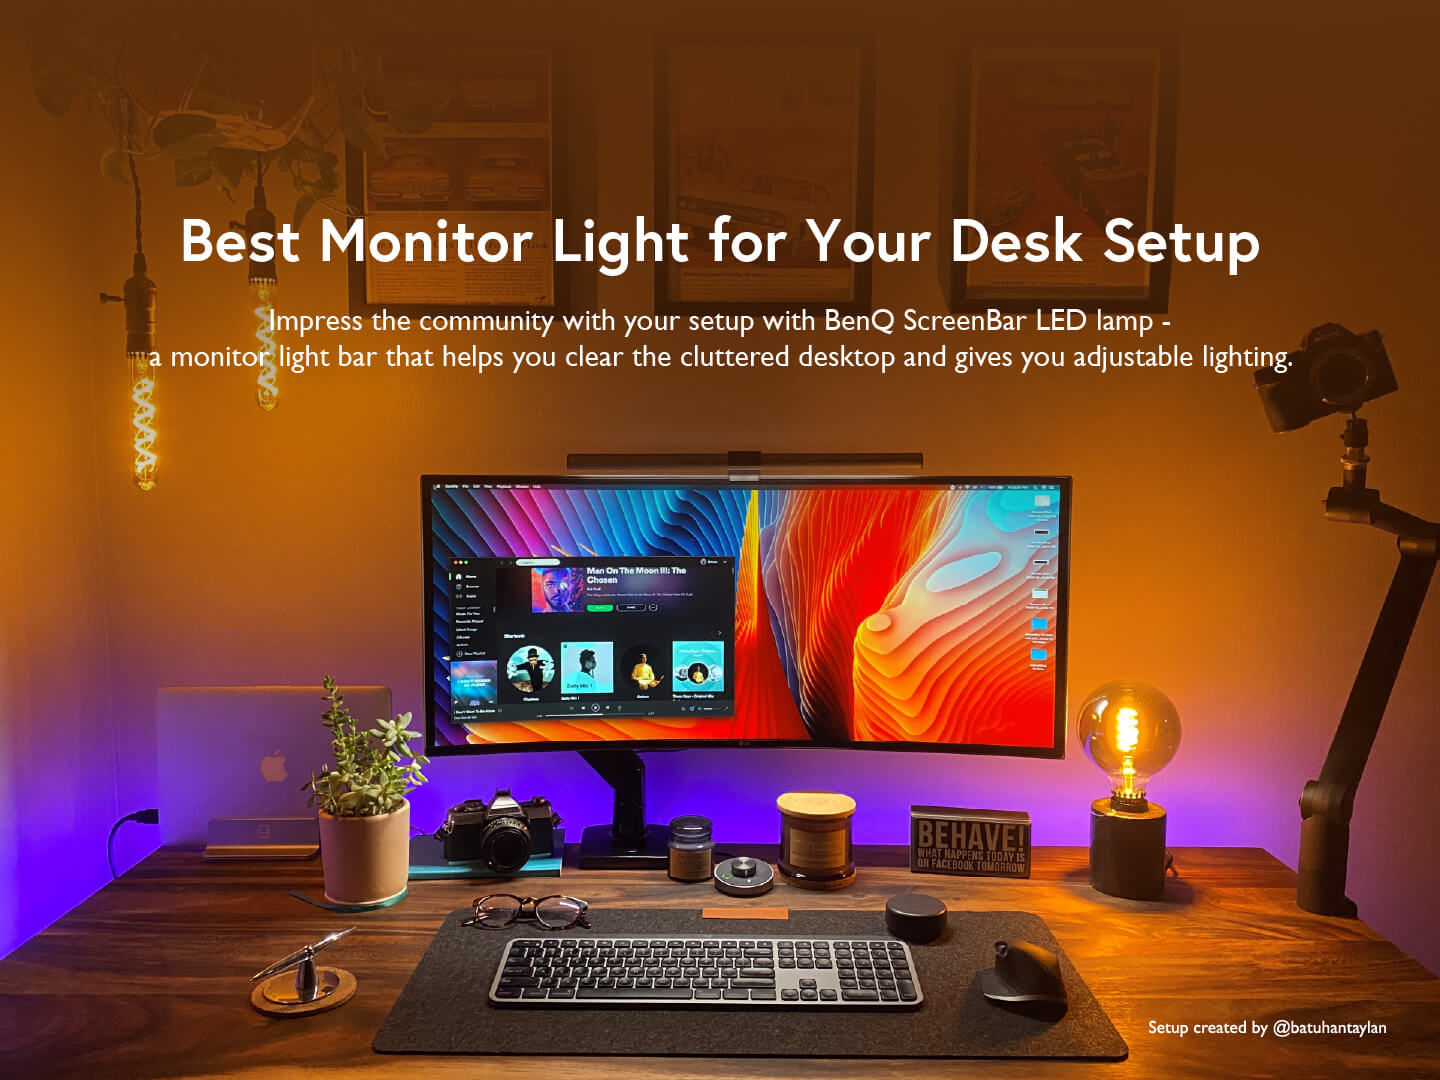 Discover the Perfect Lighting for Your Desk Setup